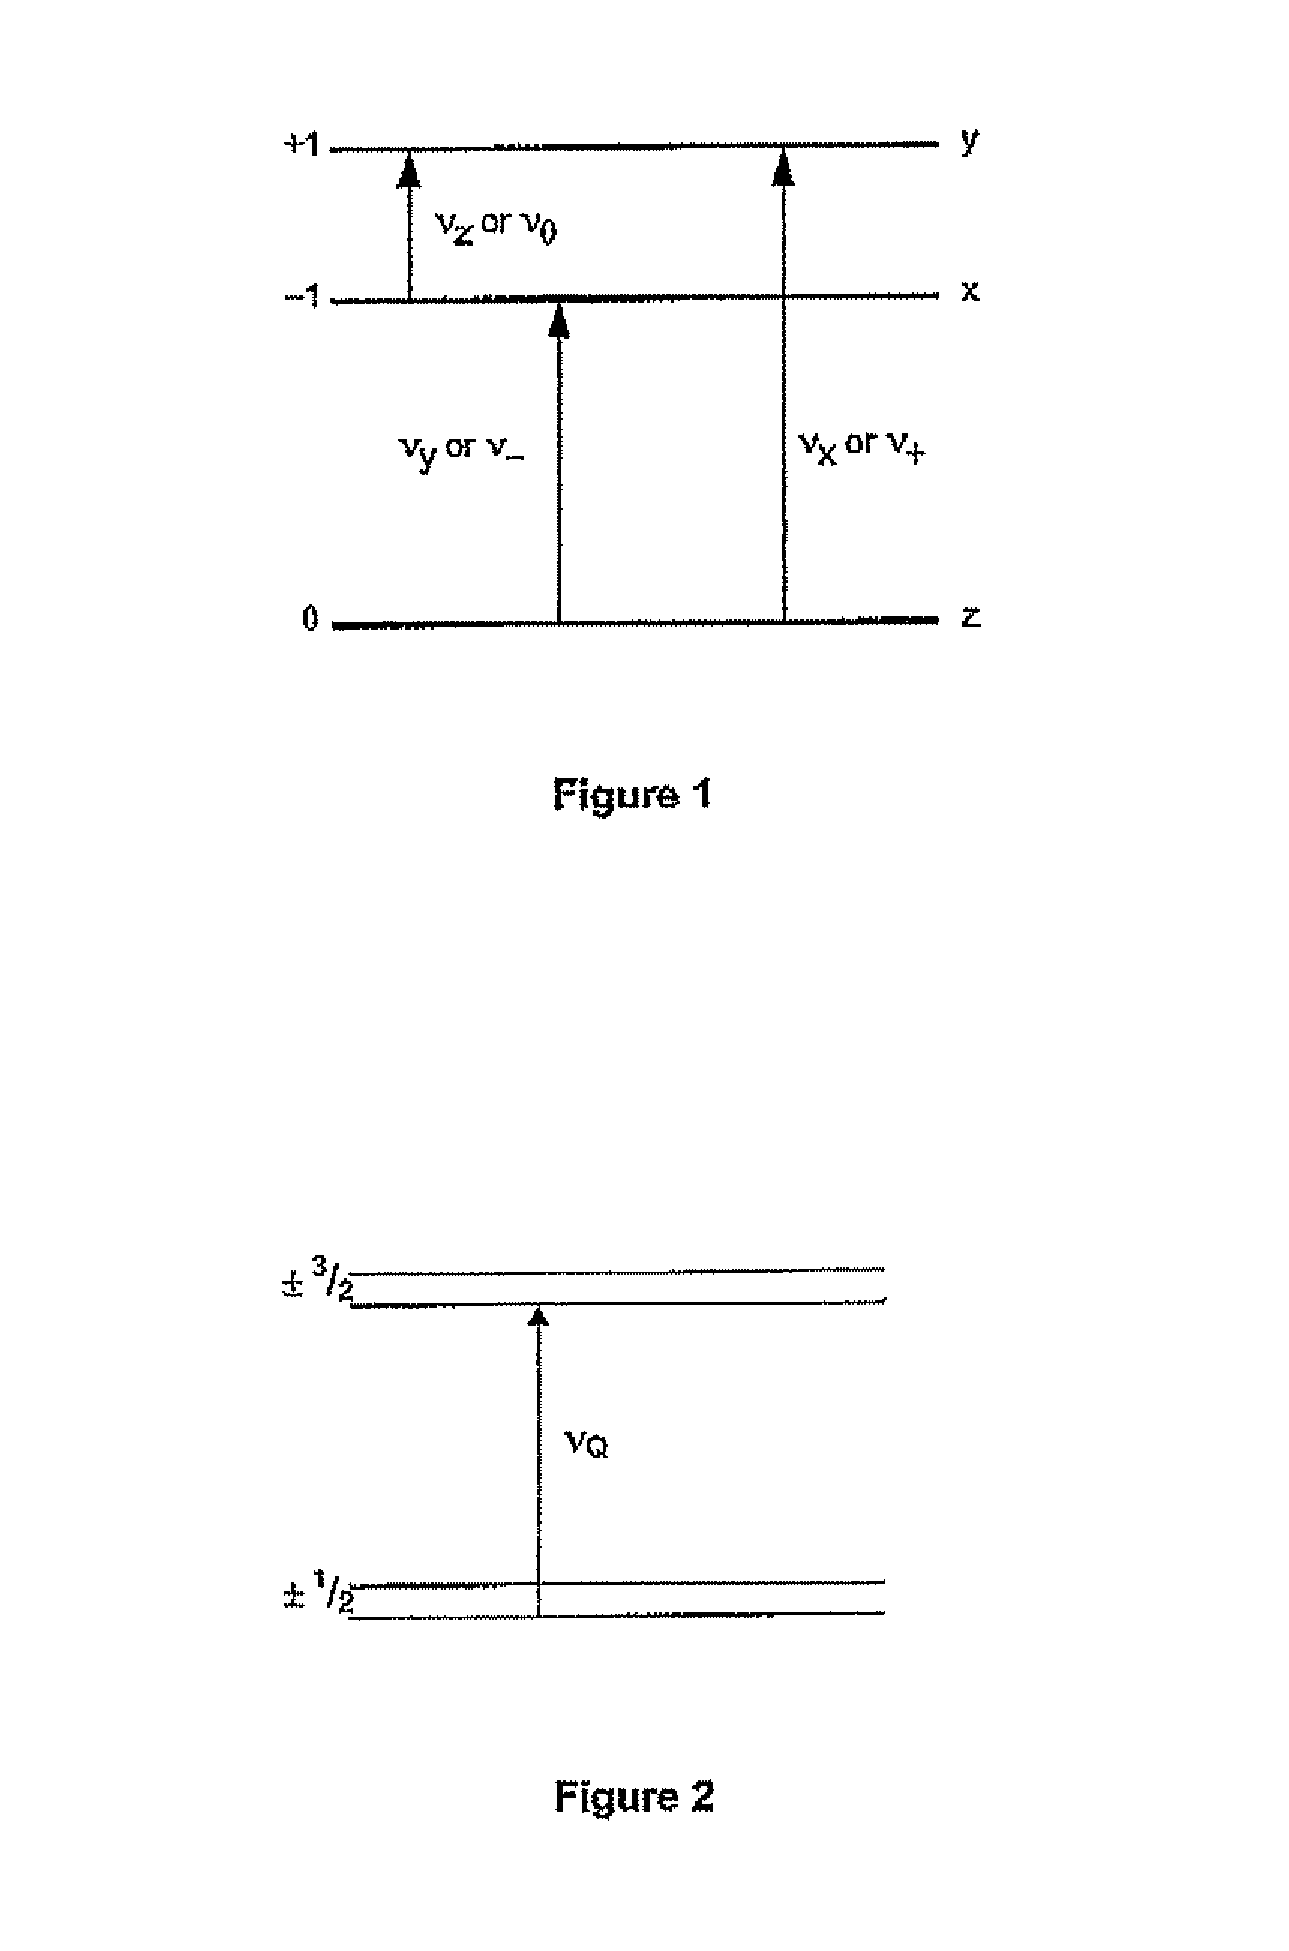 System and method for improving the analysis of polymorphic chemical substance forms and concentrations using NQR